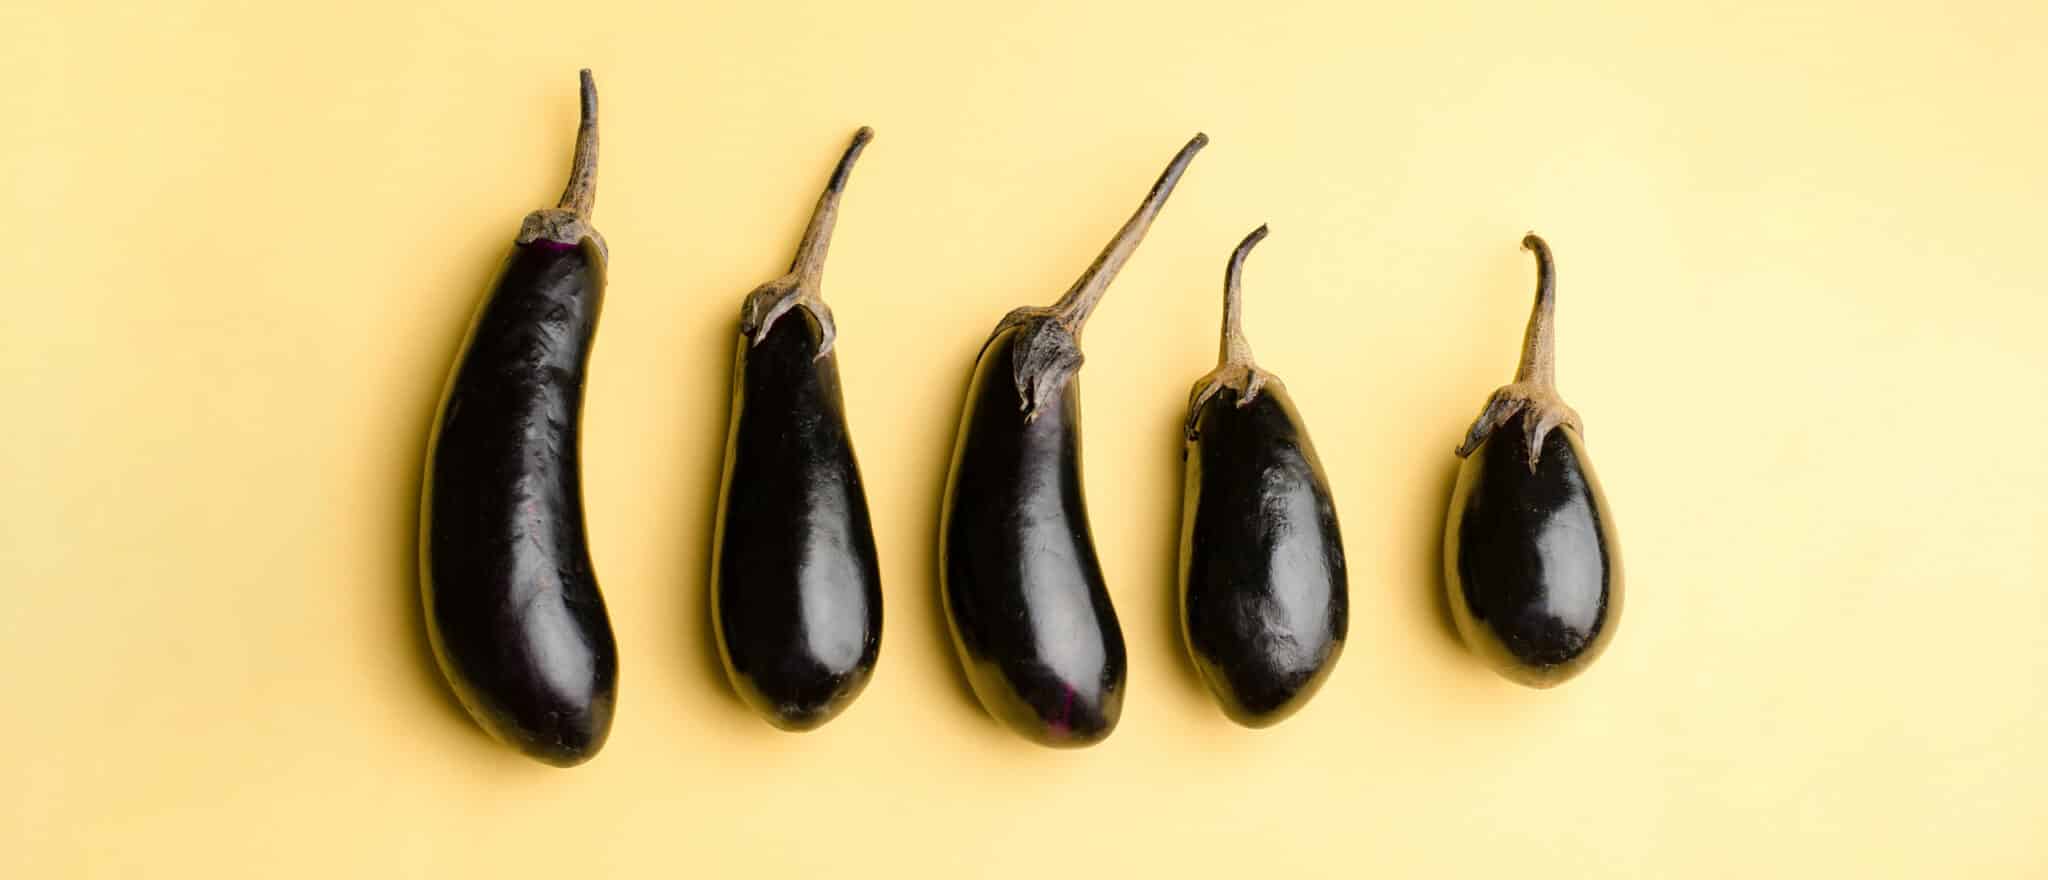 The Best Foods for Your Erection